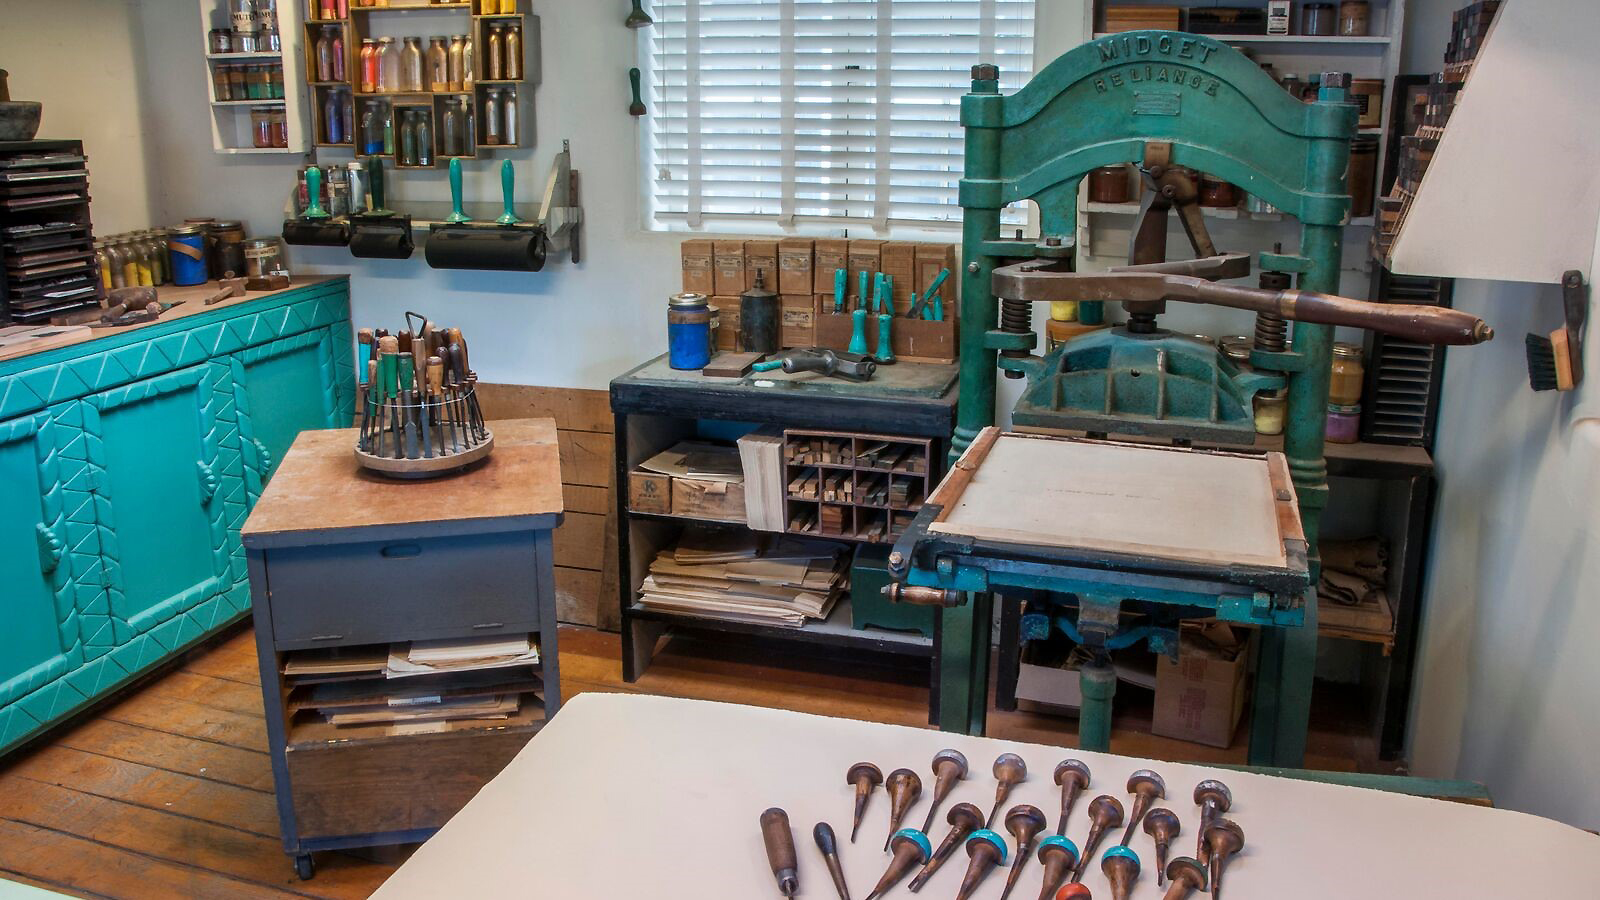 Gustave Baumann’s Midget Reliance press, carving tools and pigments. Photo by Blair Clark